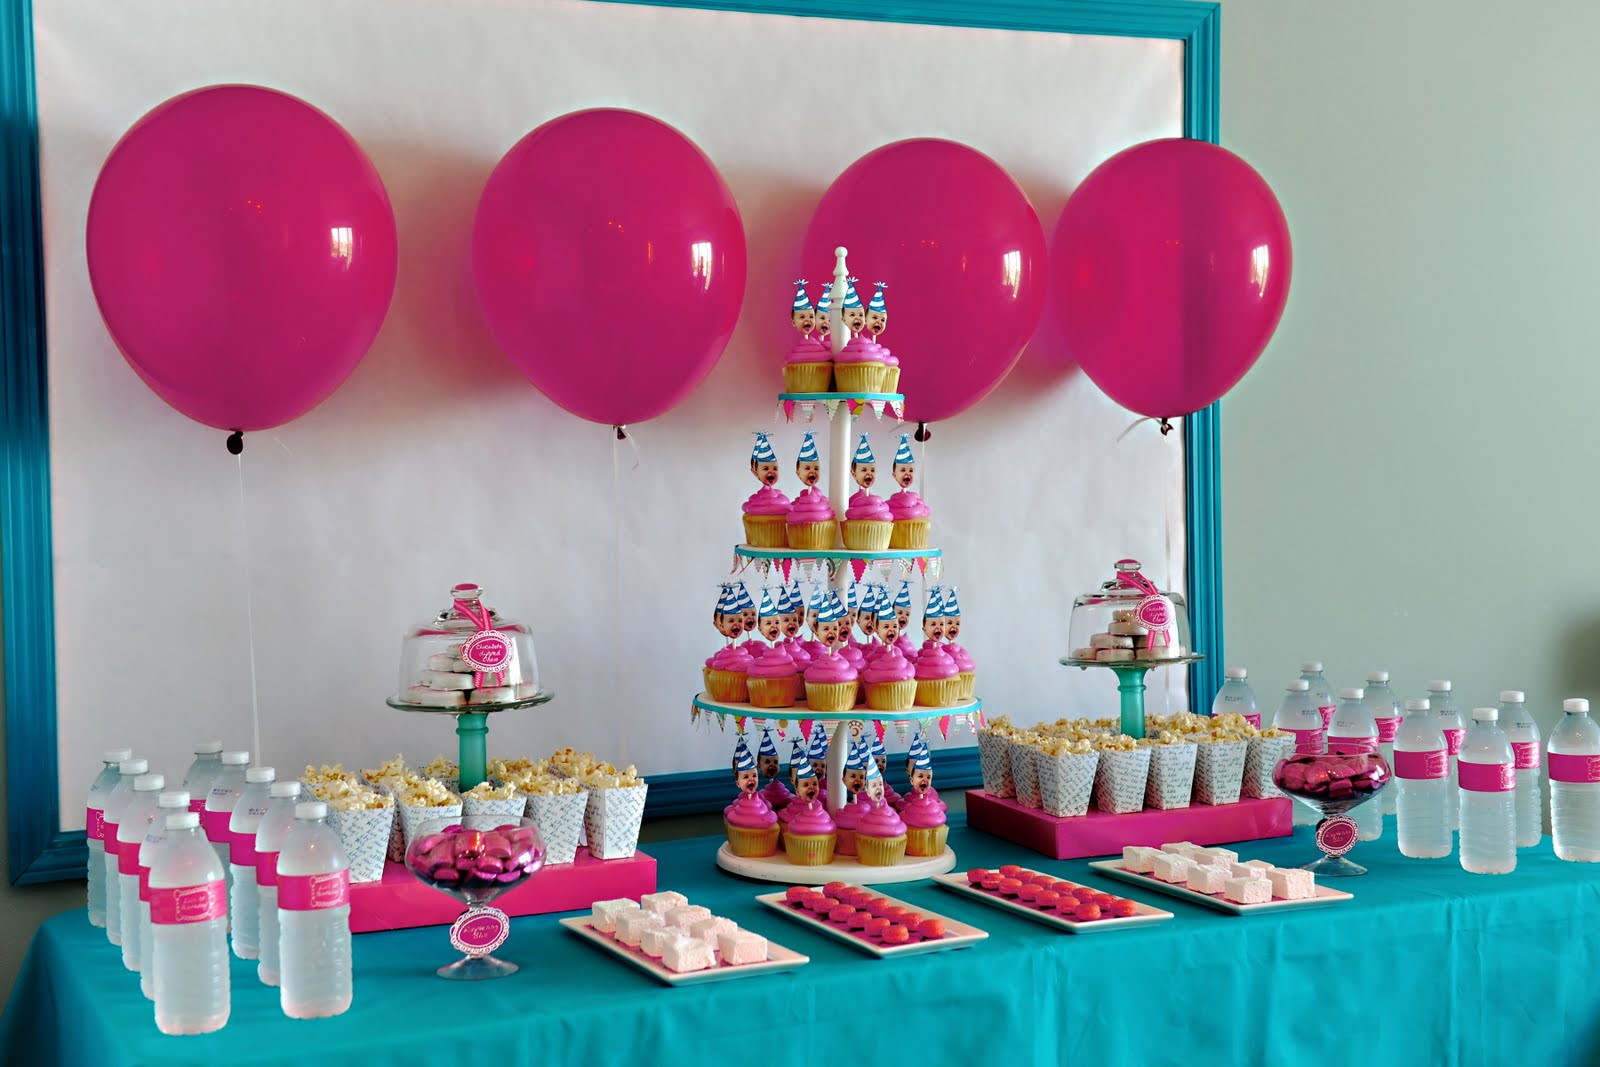 Birthday Party Decoration Ideas For 1 Year Old
 Elle Belle Creative e Year Old in a Flash The Dessert